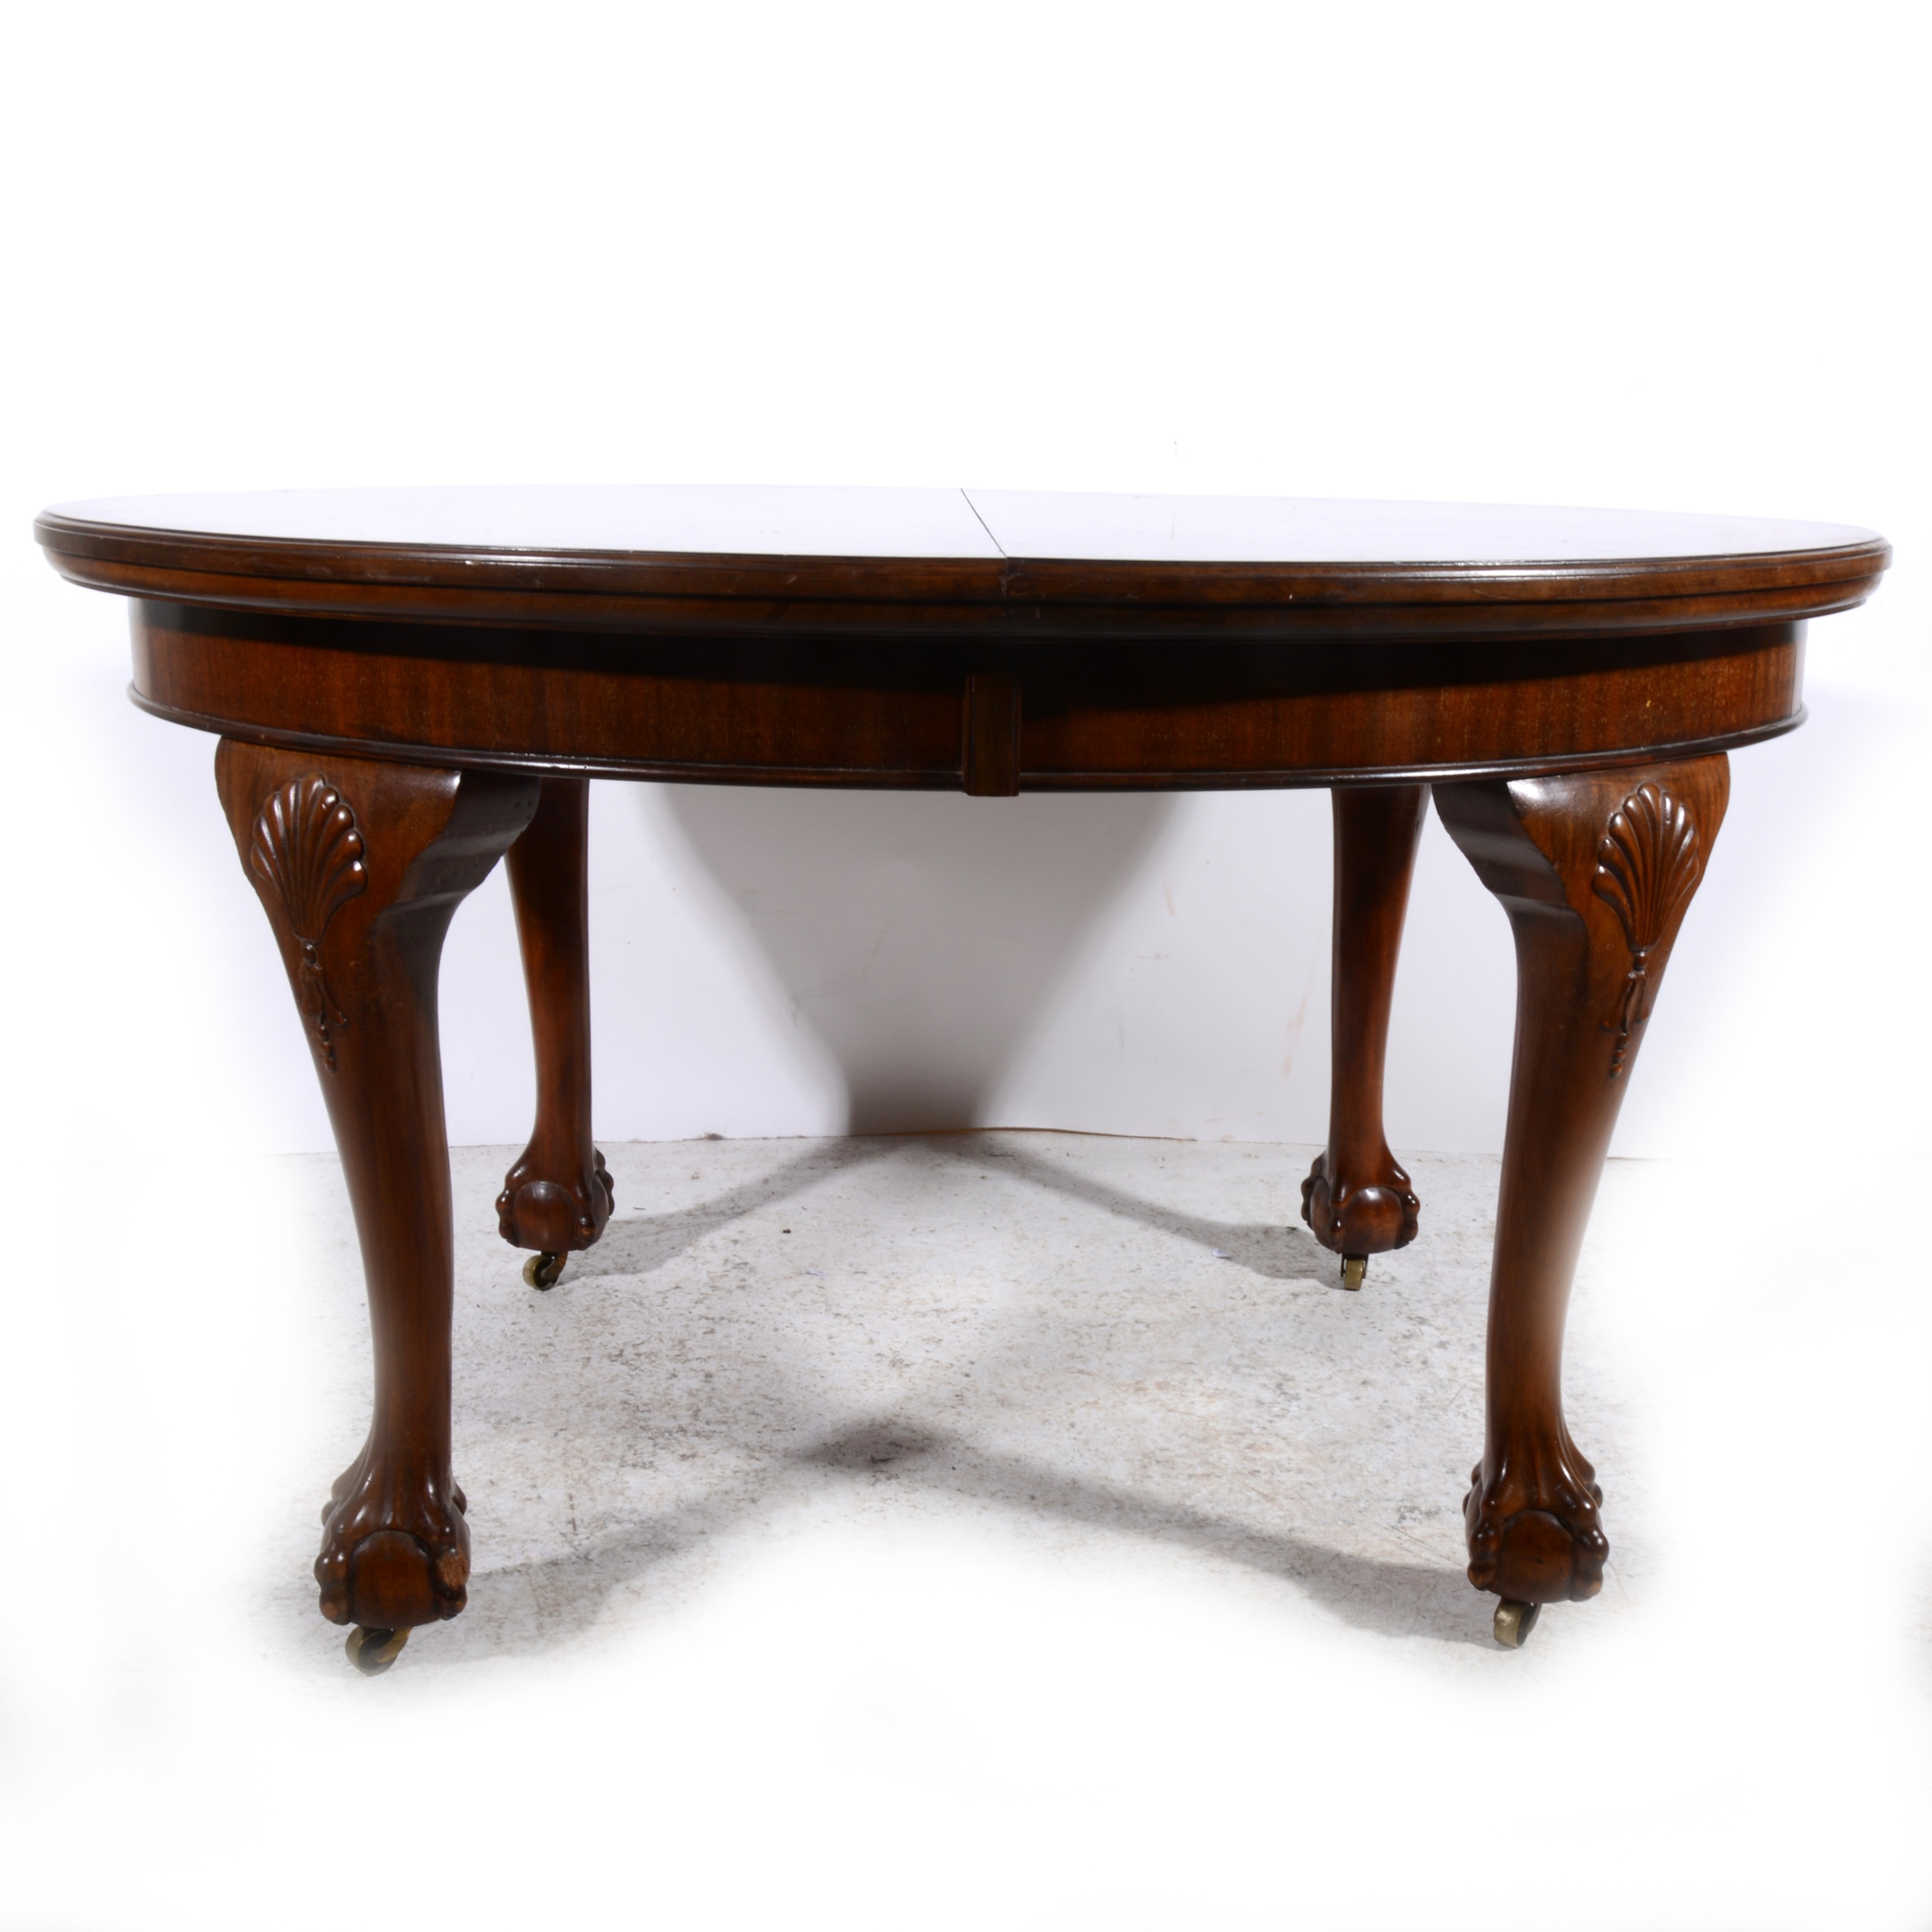 Oval extending dining table, with two additional leaves